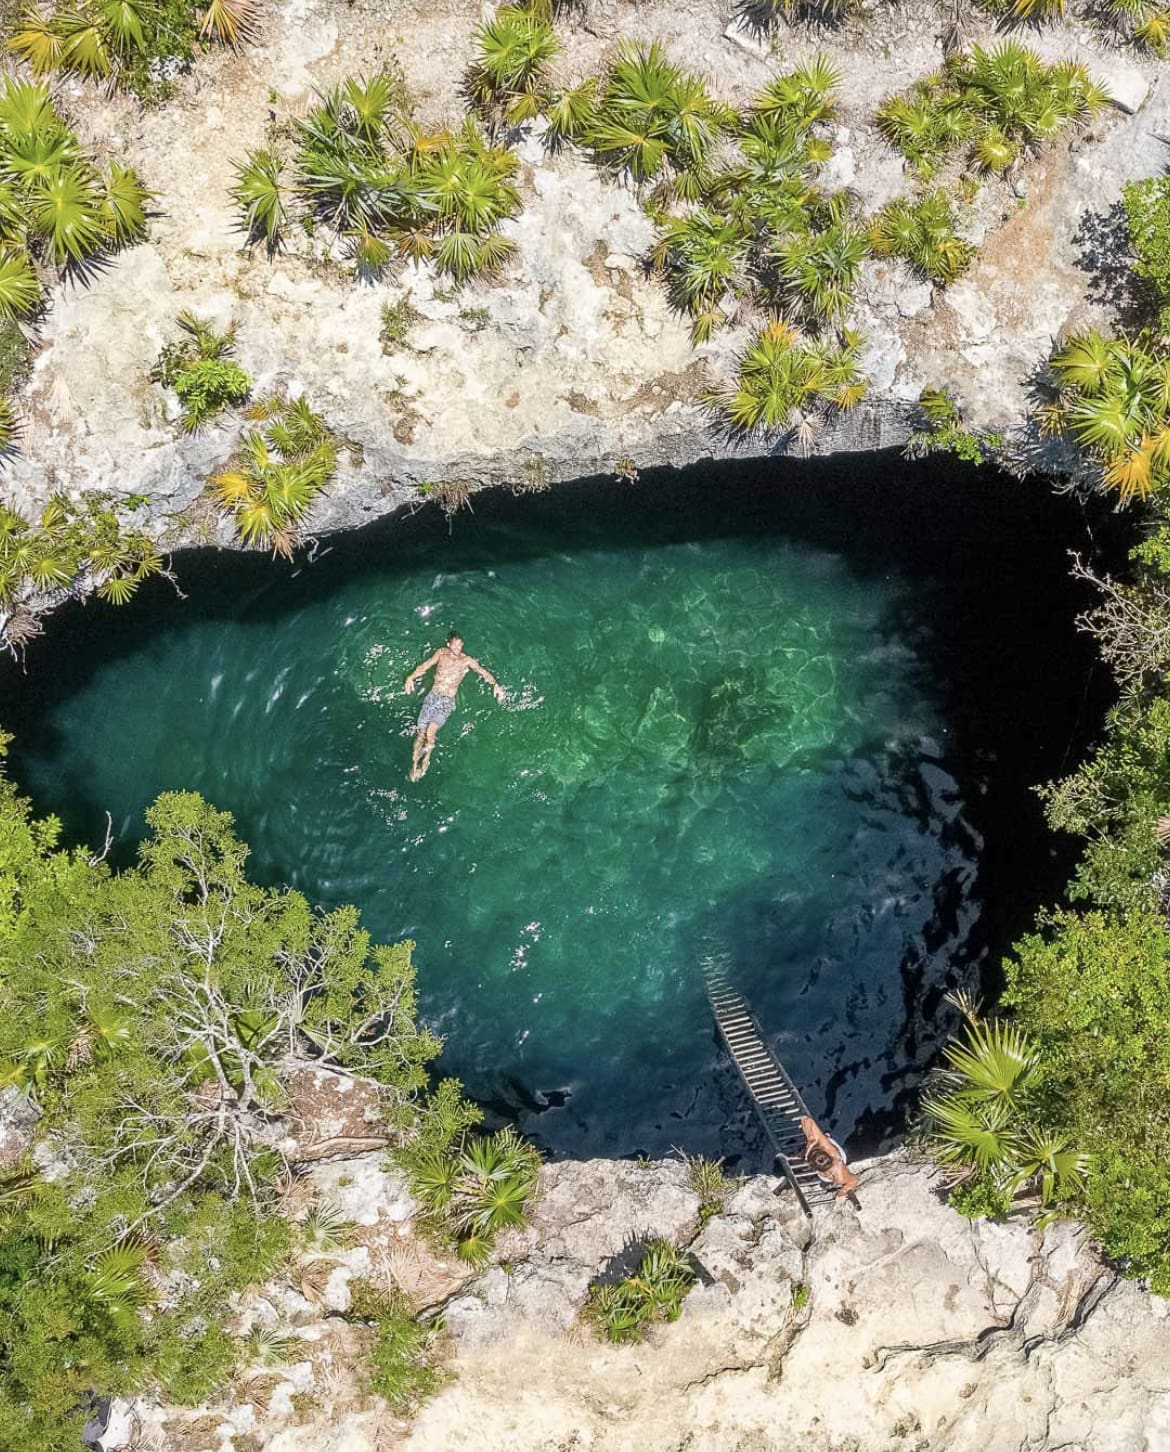 Owl's hole is a natural freshwater pool